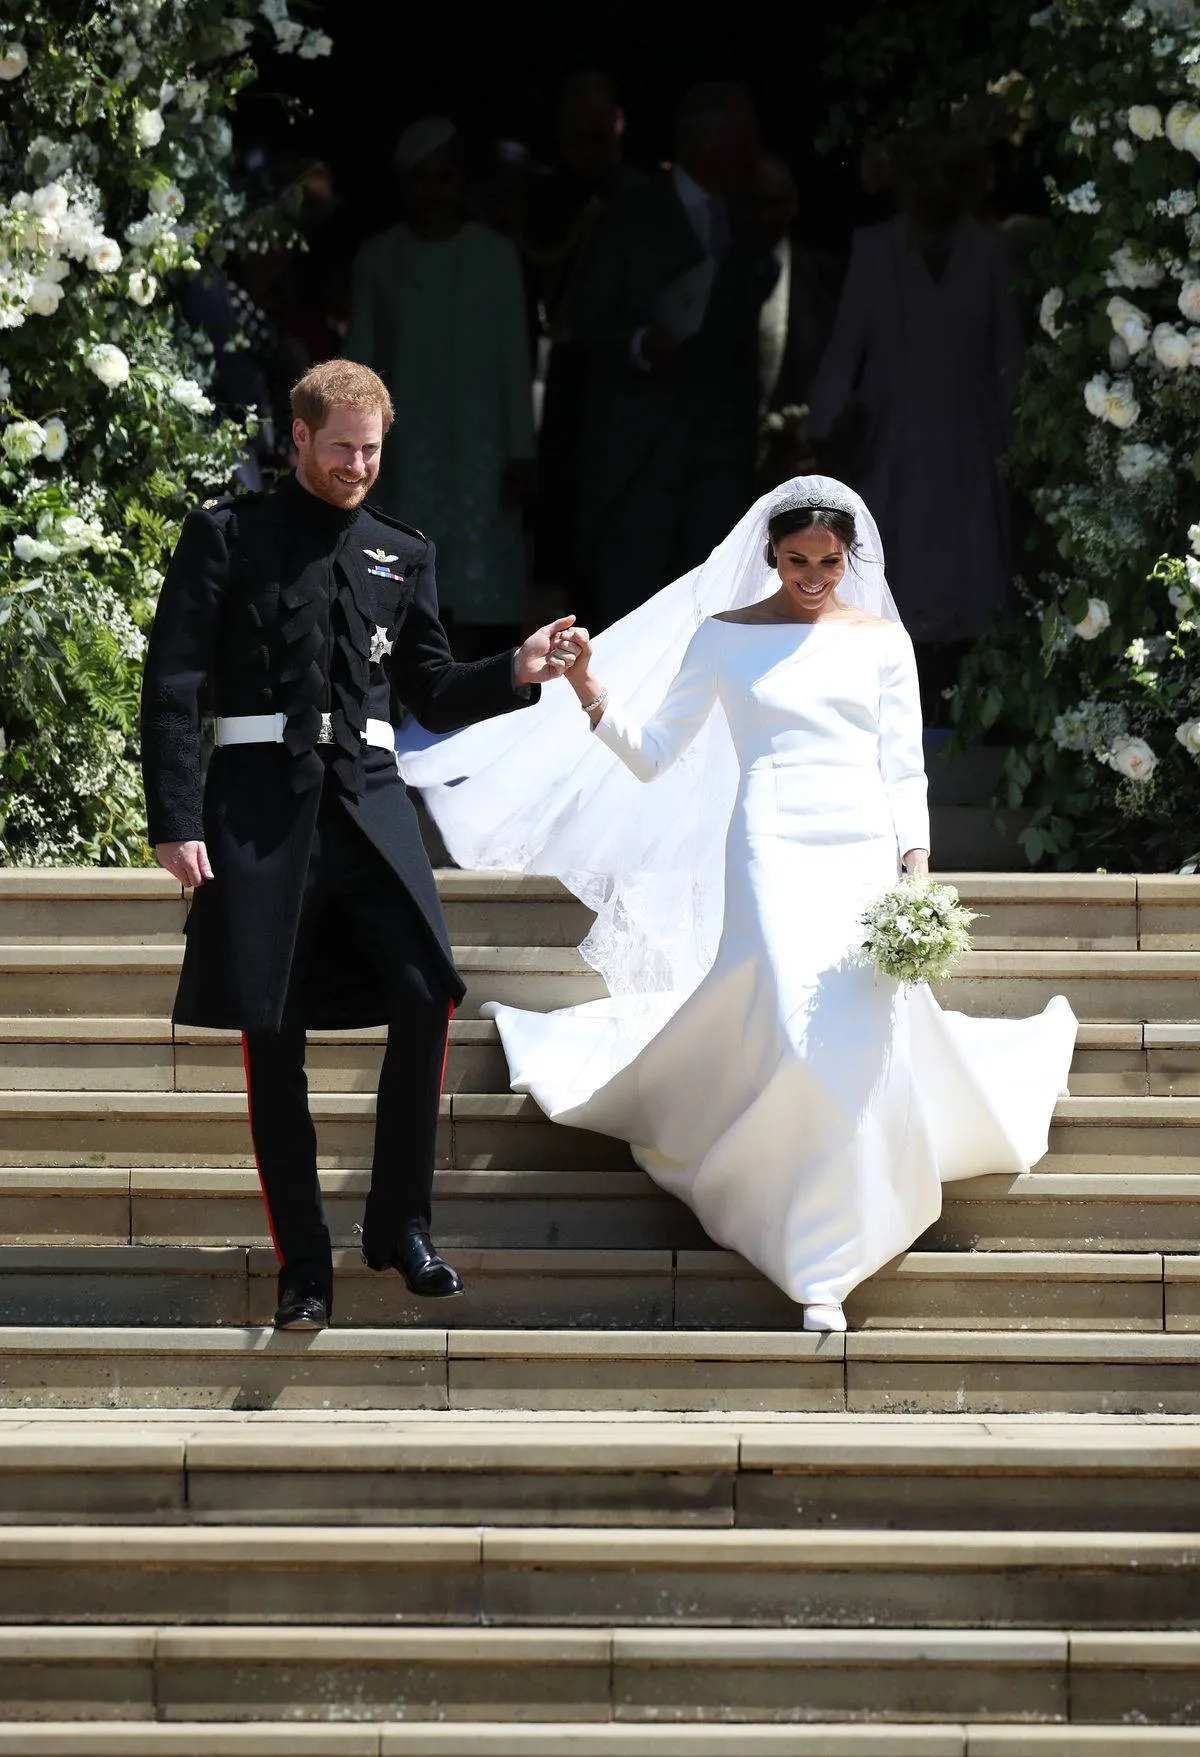 Prince Harry and Meghan Markle walk down the Windsor castle stairs after getting married.